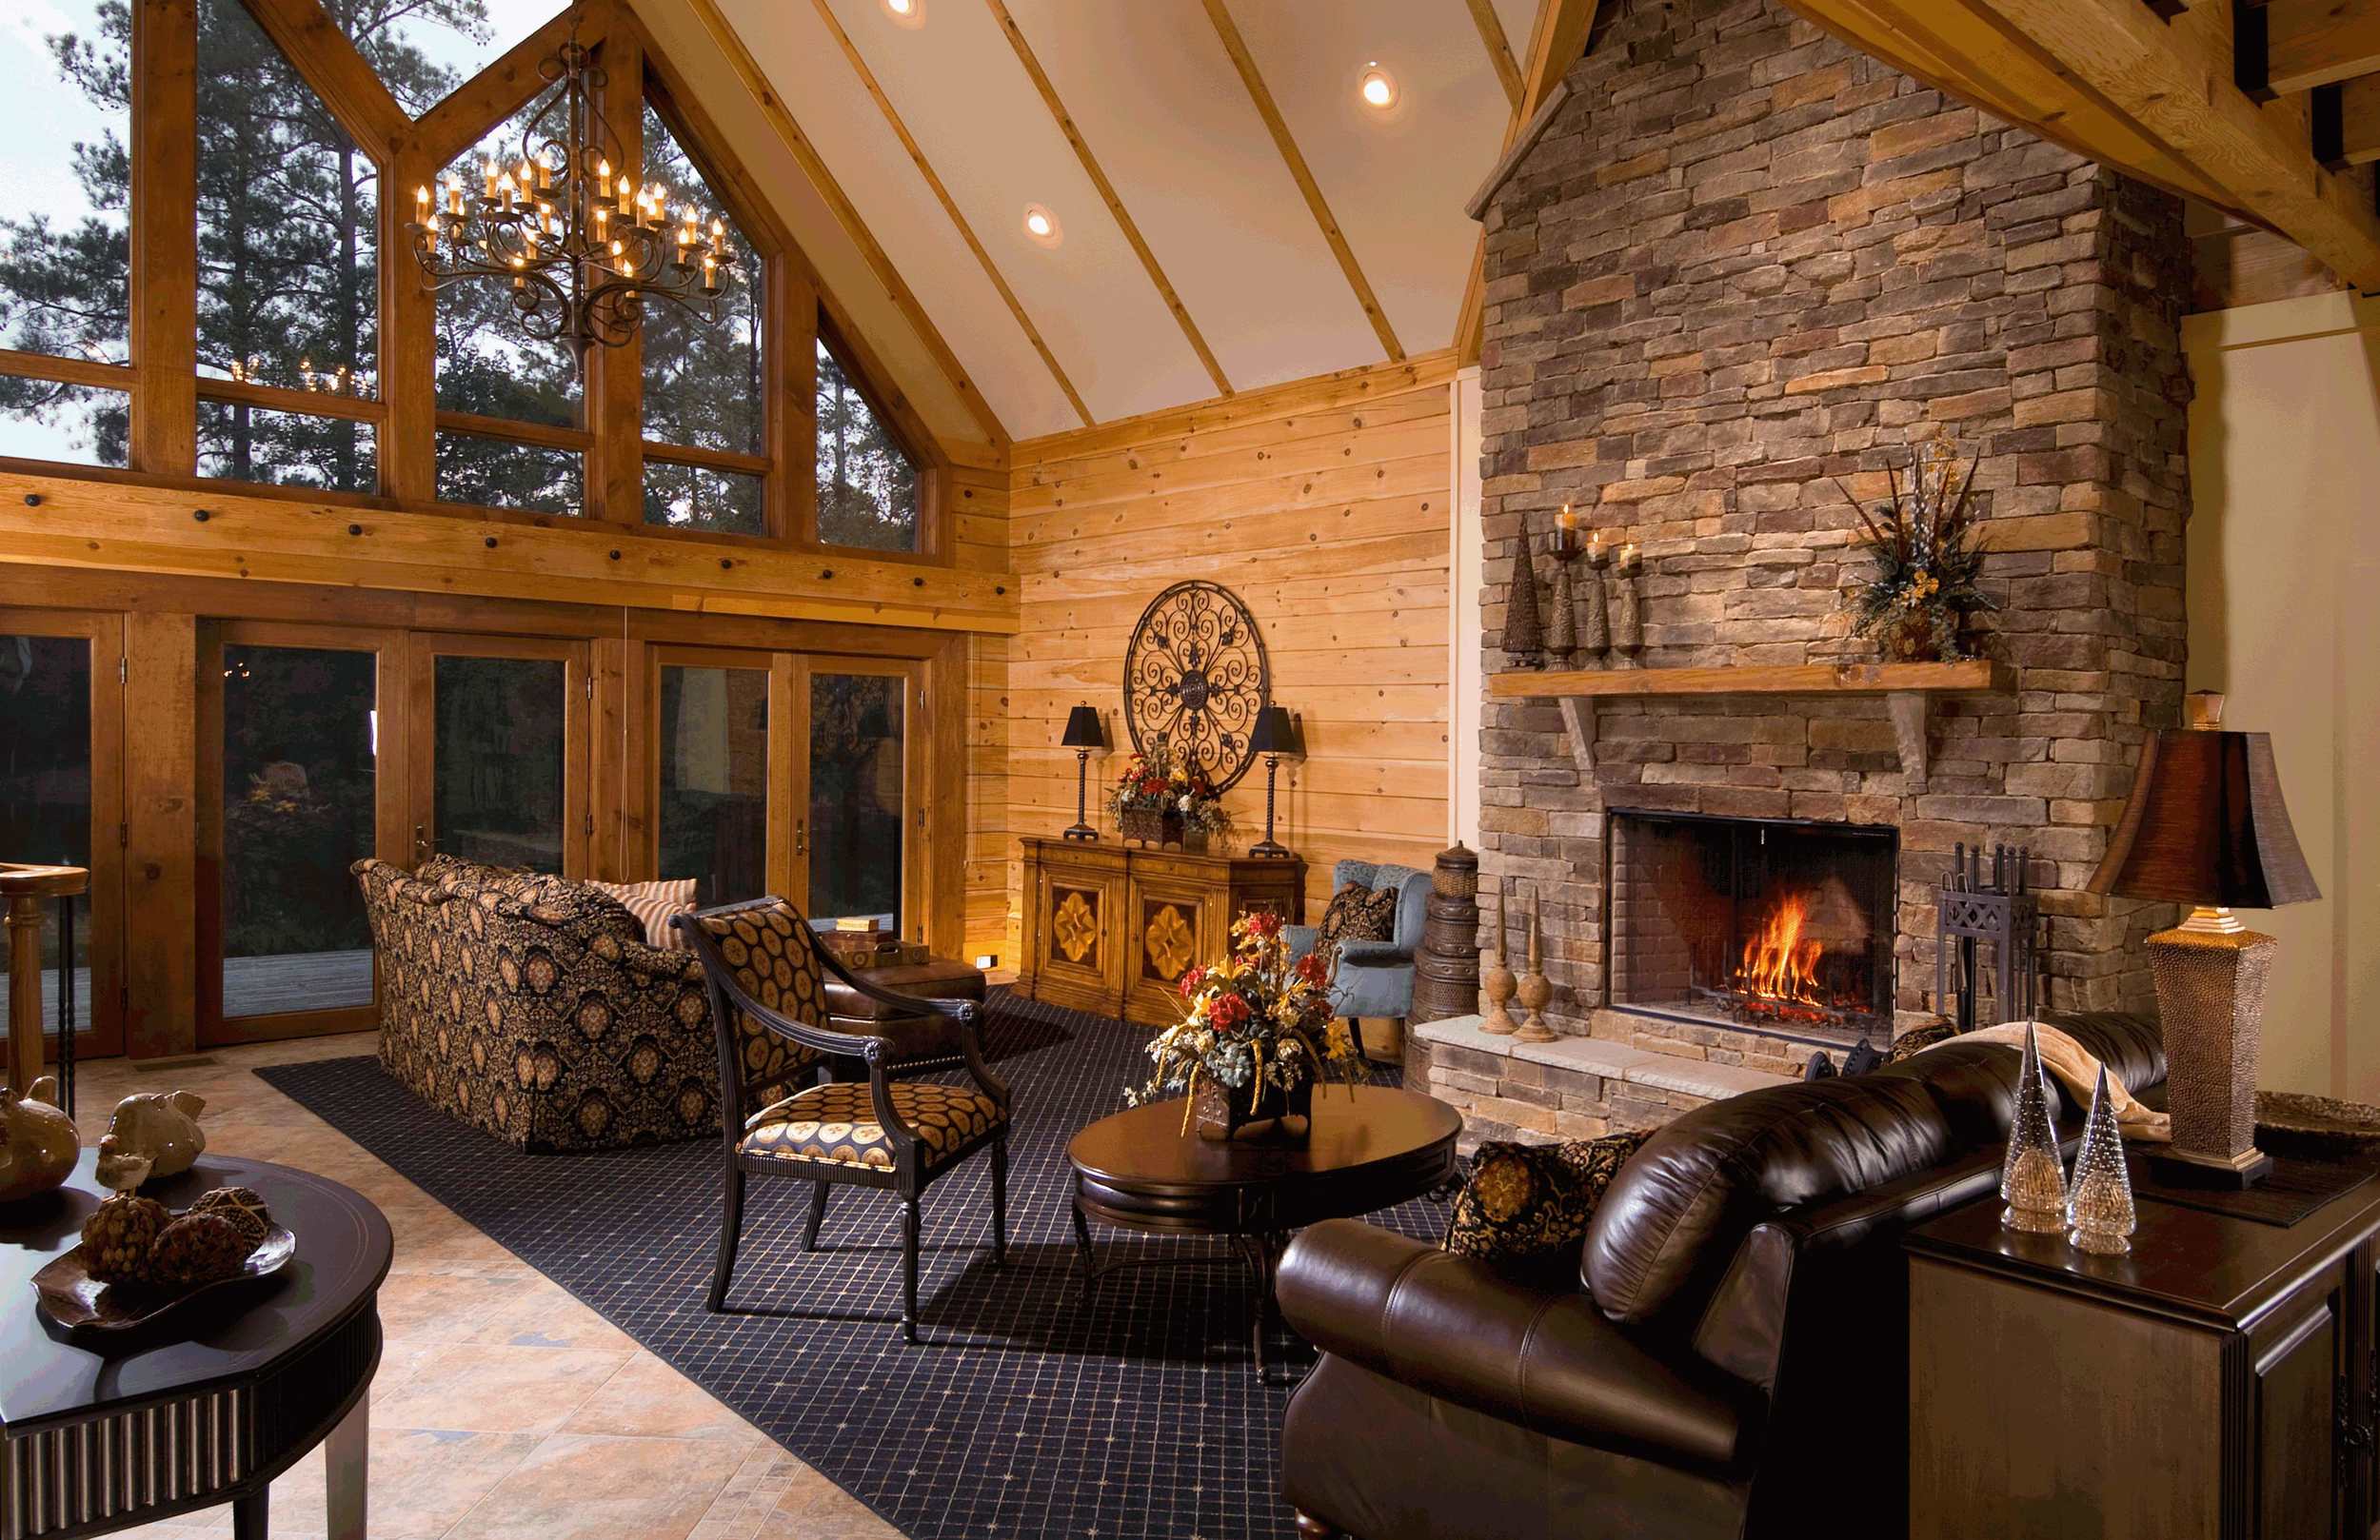 show off that fire place!